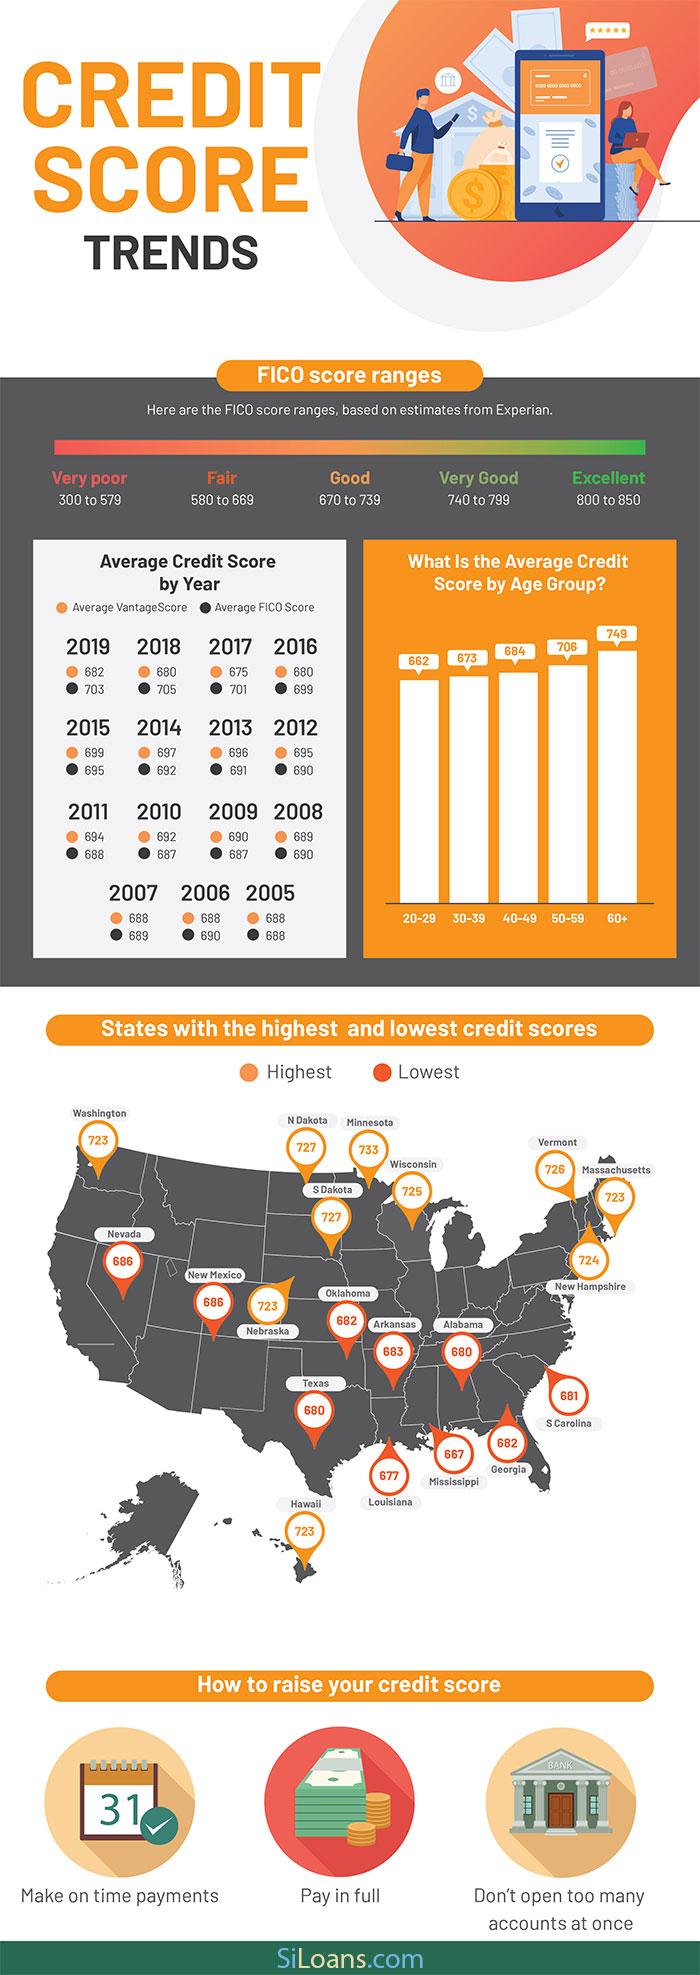 Credit Score Trends Infographic